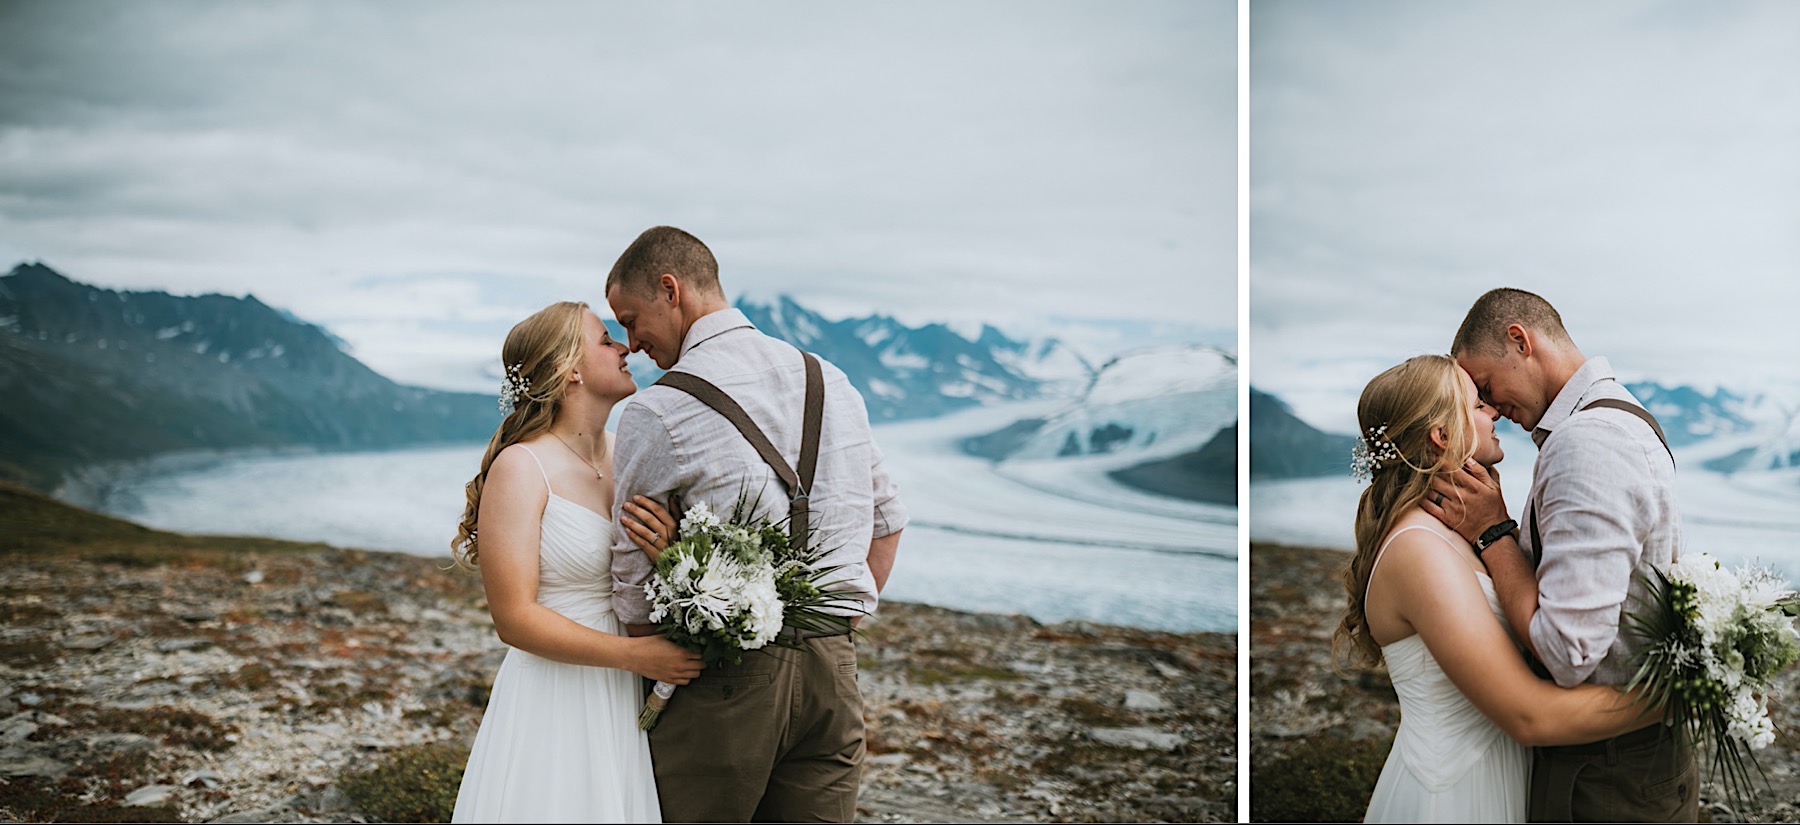 Side by side image of bride and groom smiling at each other during their alaska destination wedding